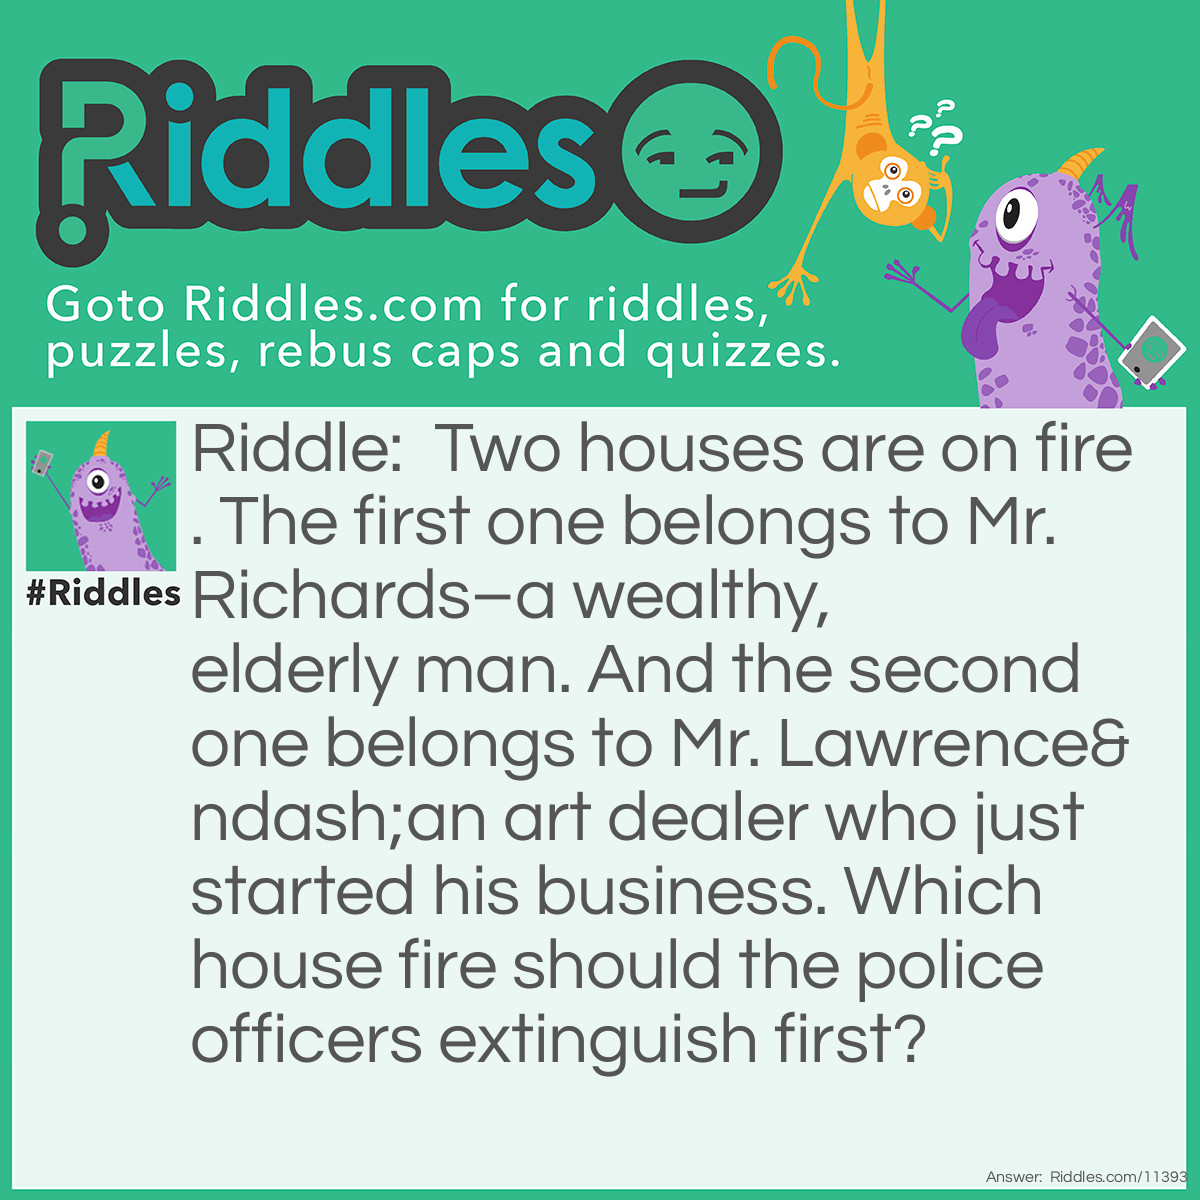 Riddle: Two houses are on fire. The first one belongs to Mr. Richards–a wealthy, elderly man. And the second one belongs to Mr. Lawrence–an art dealer who just started his business. Which house fire should the police officers extinguish first? Answer: The police officers shouldn't extinguish either house fire because it's not part of their job! Police officers don't fight fires; that's what firefighters do!